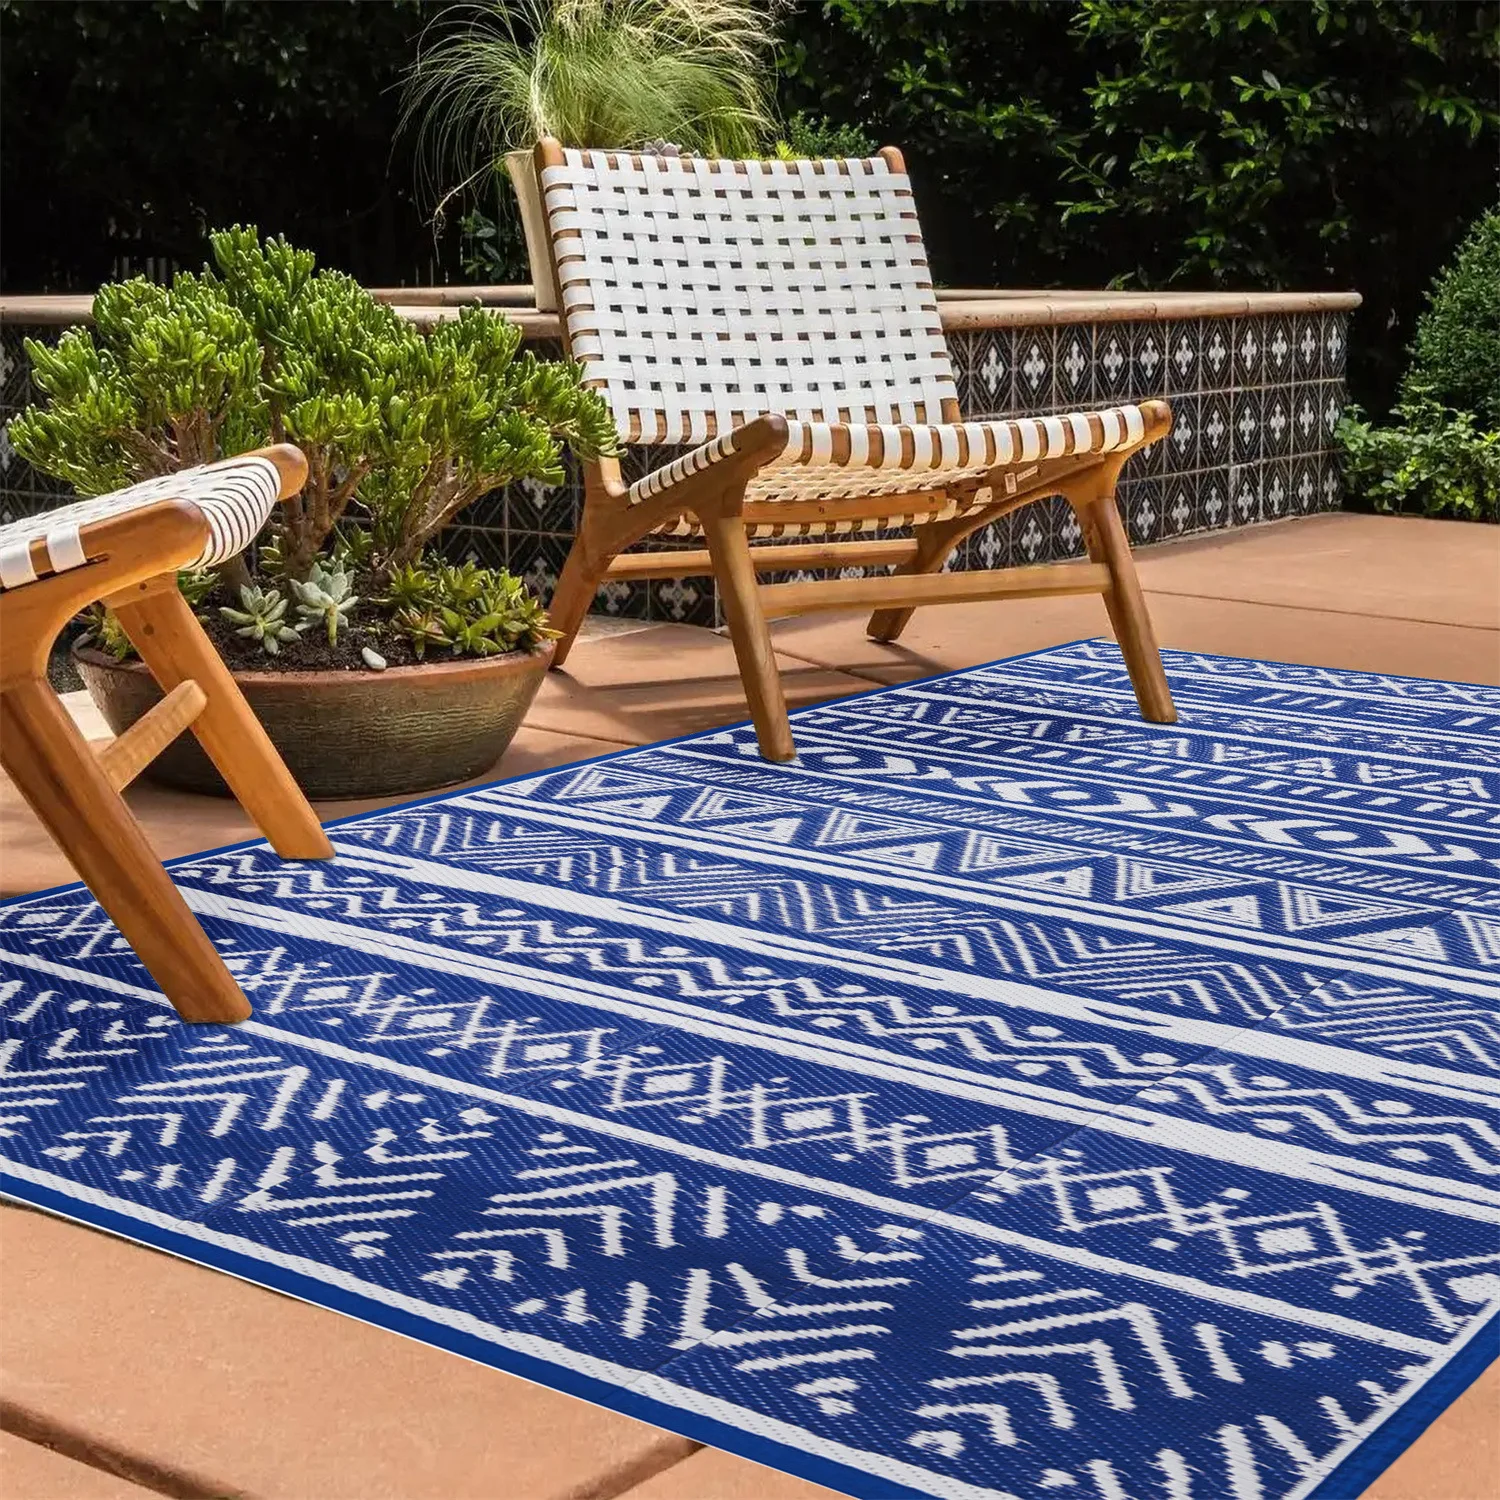 

Home Garden Patio Rug Thick Durable Yard Mat Folding Portable Outdoor RV Camping Picnic Mats Reversible Moisture-proof Floor Pad